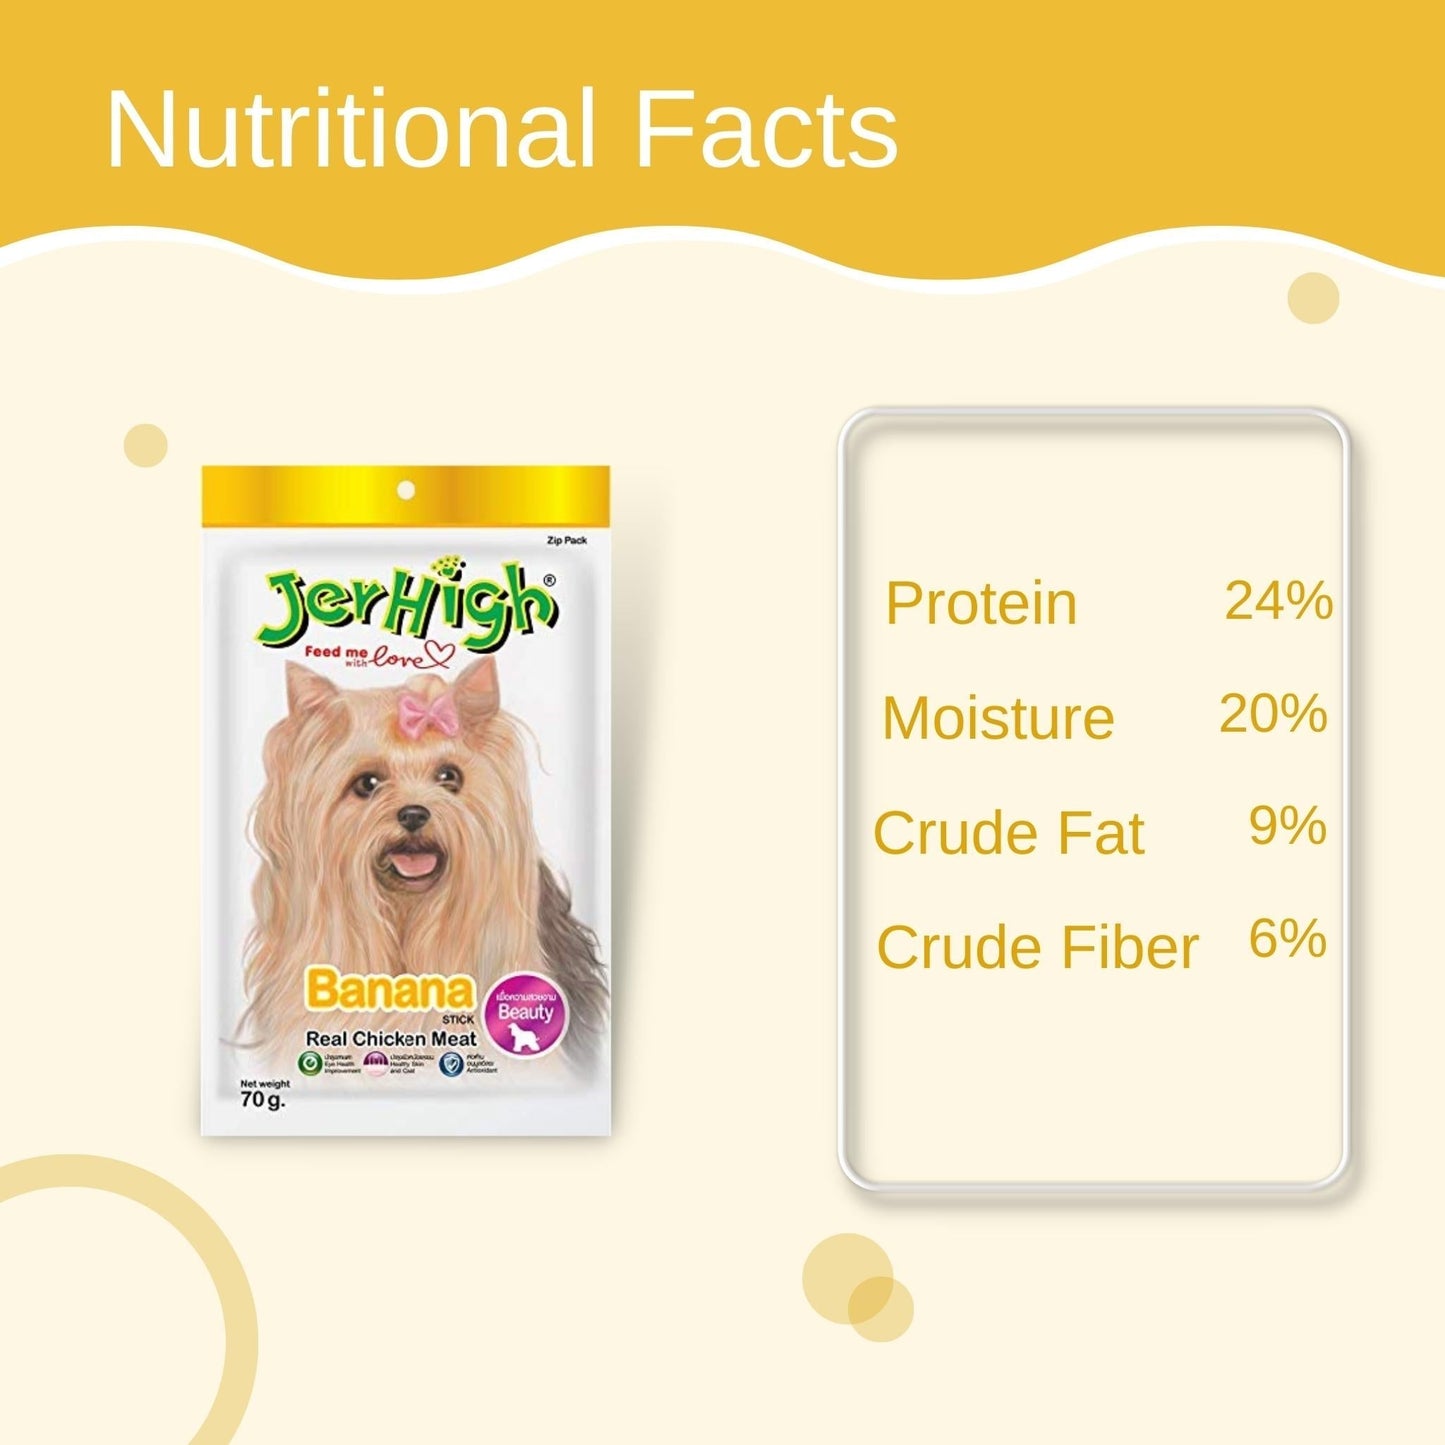 JerHigh Banana Stick Dog Treat with Real Chicken Meat - 70g, Pack of 6